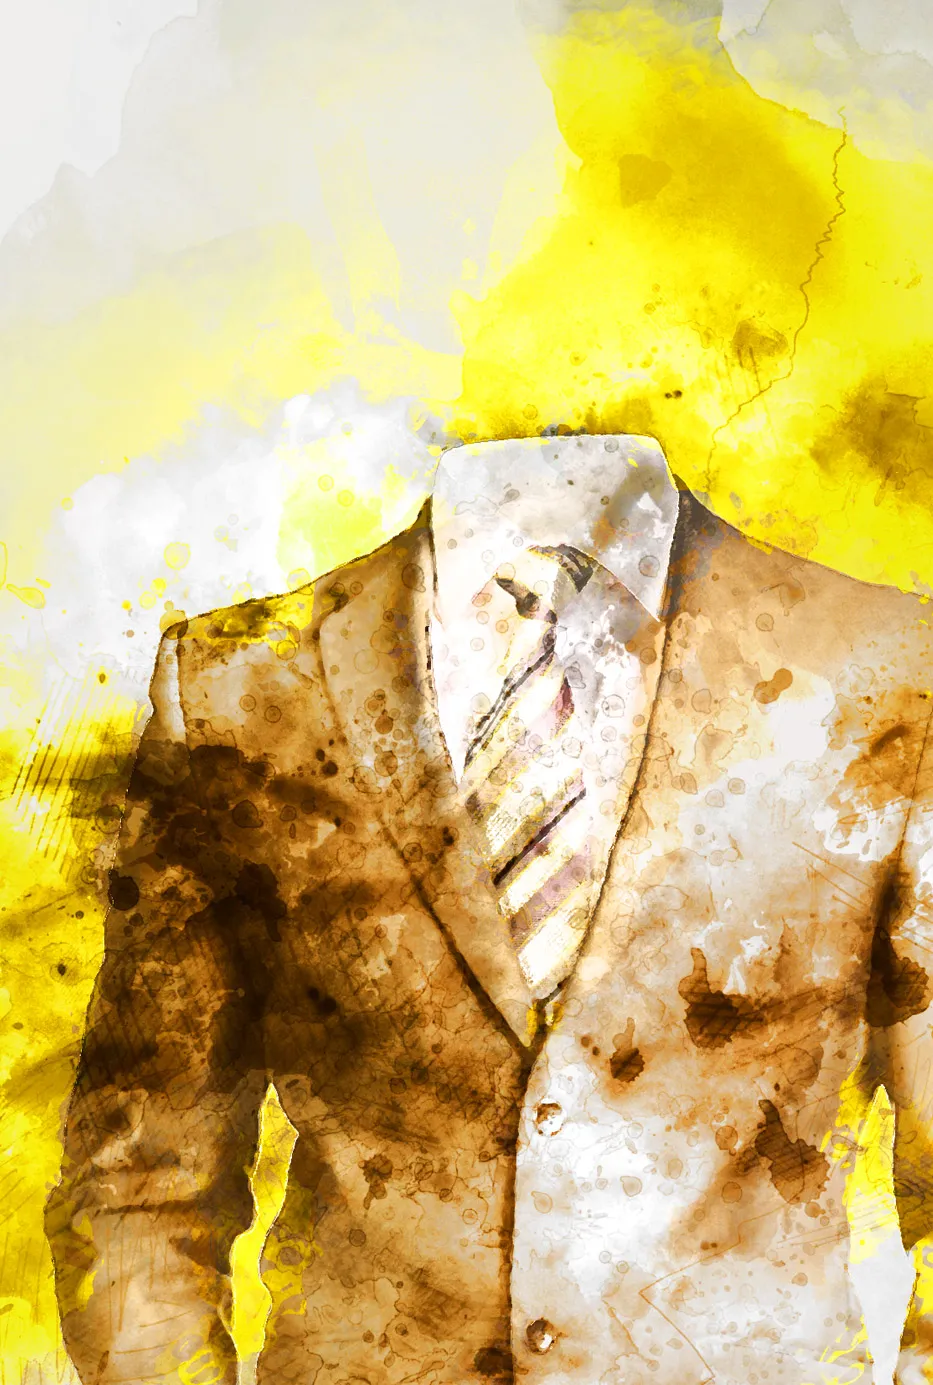 A painted man in a suit but with no head, a yellow splash of color throughout the picture.